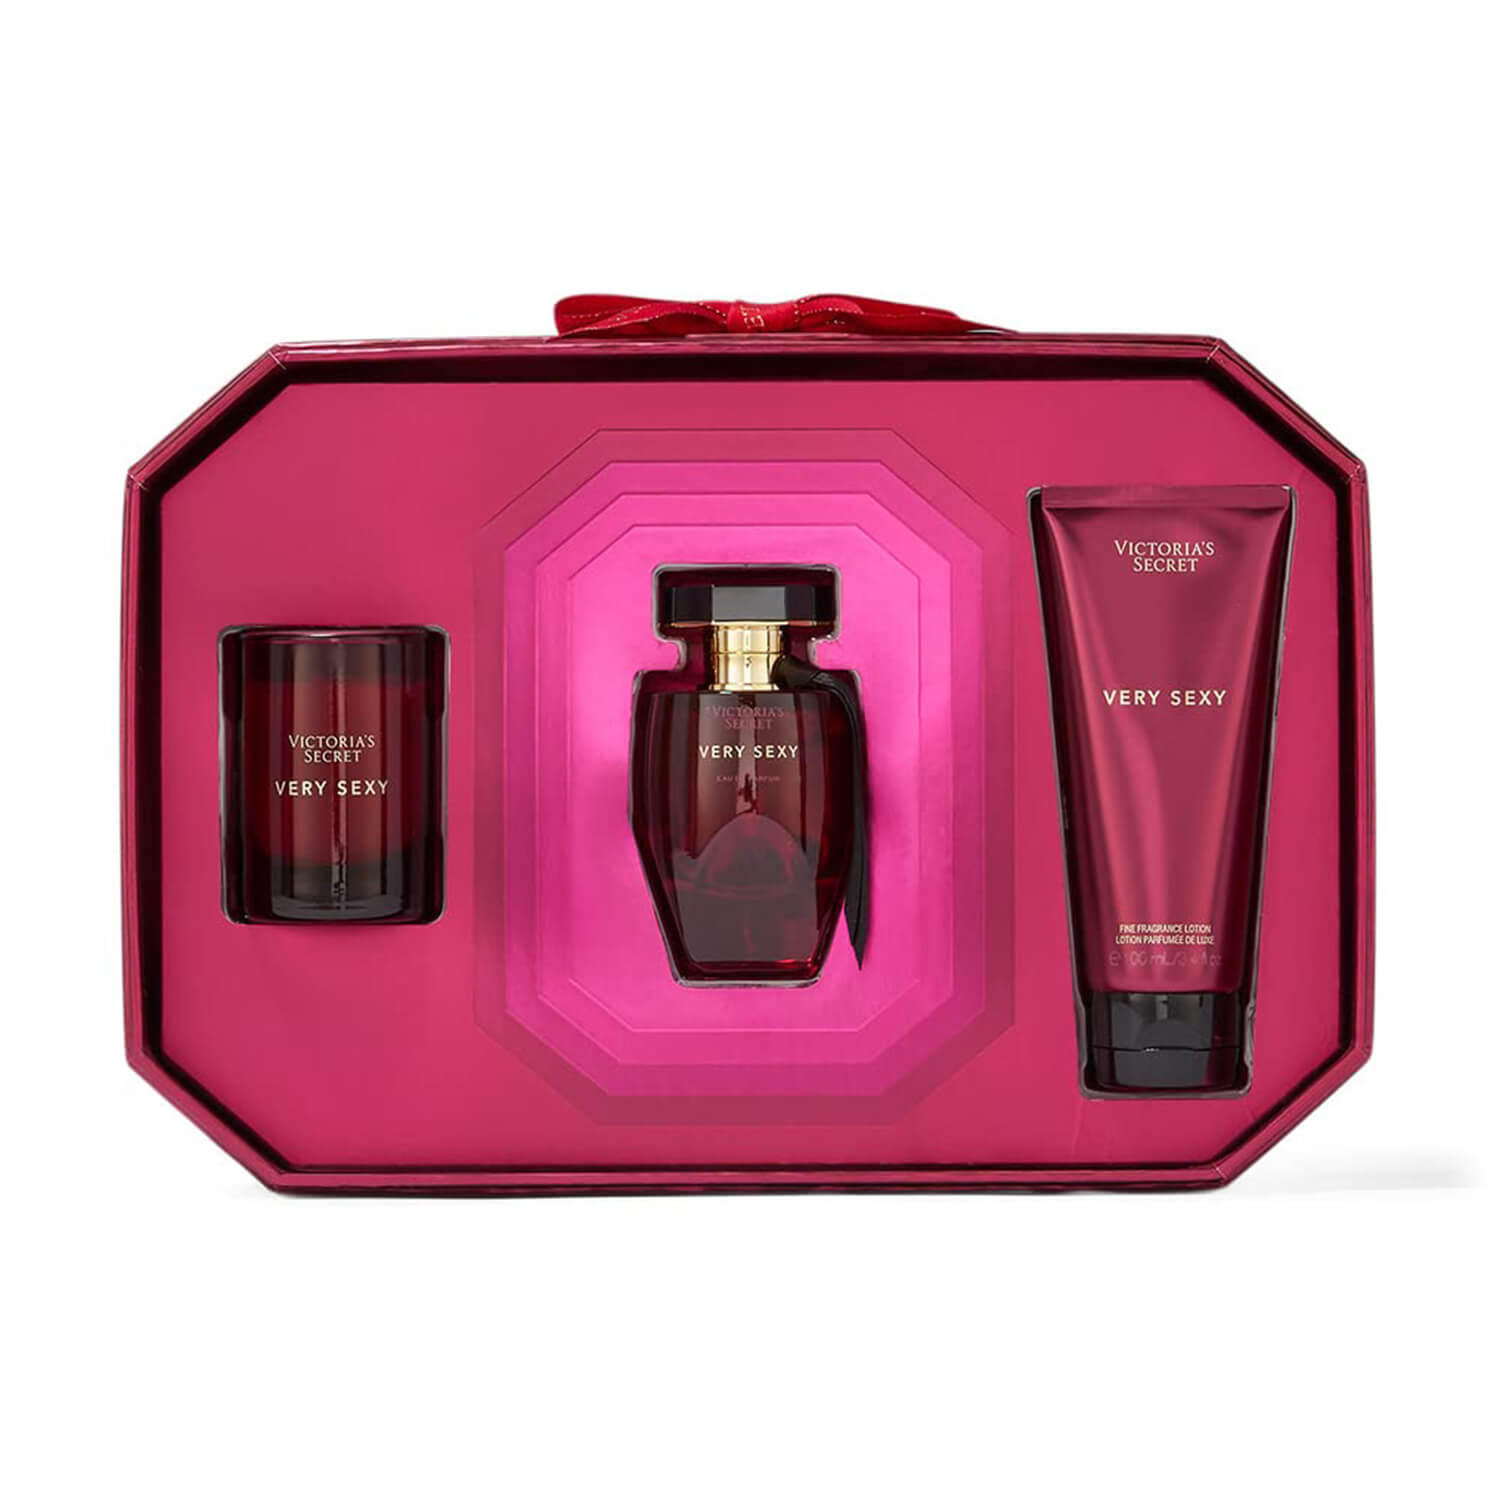 Shop Victoria's Secret Very Sexy perfume gift set available at Heygirl.pk for delivery in Pakistan